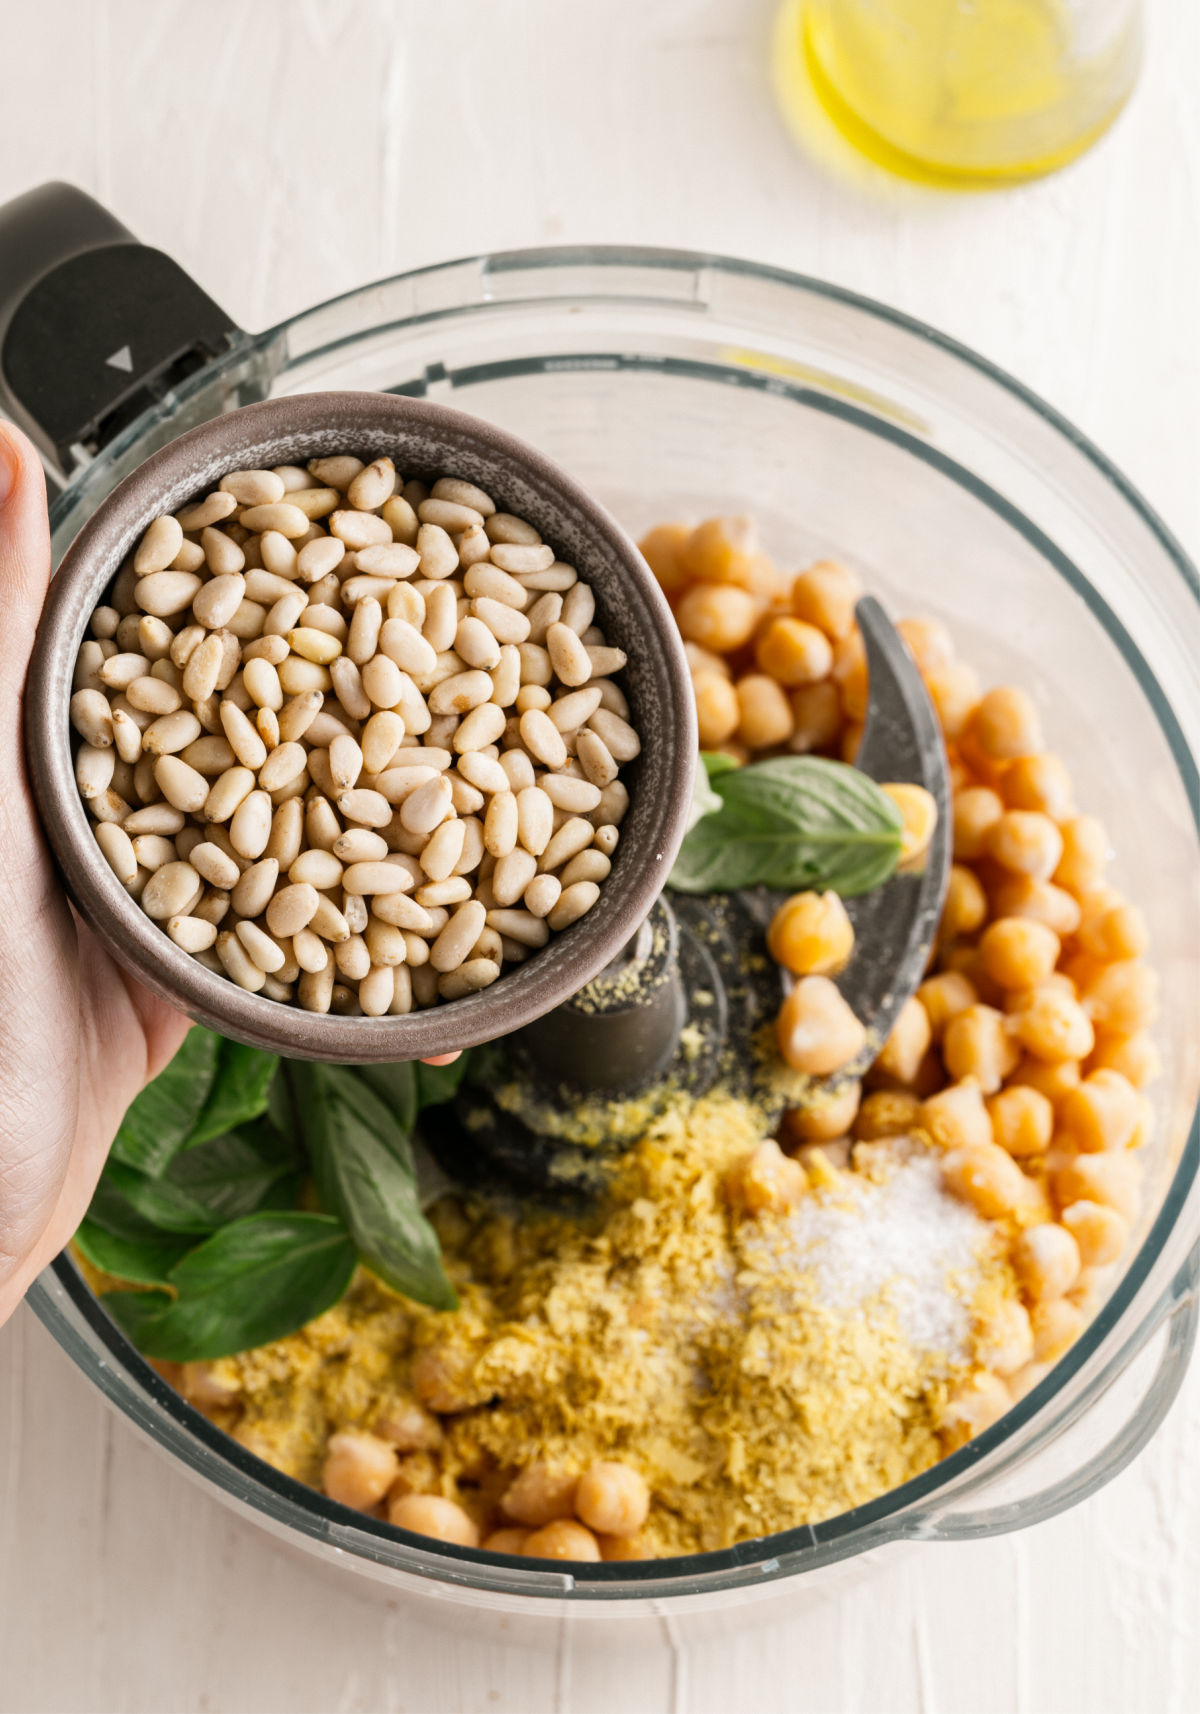 Ingredients being added to food processor for pesto hummus.